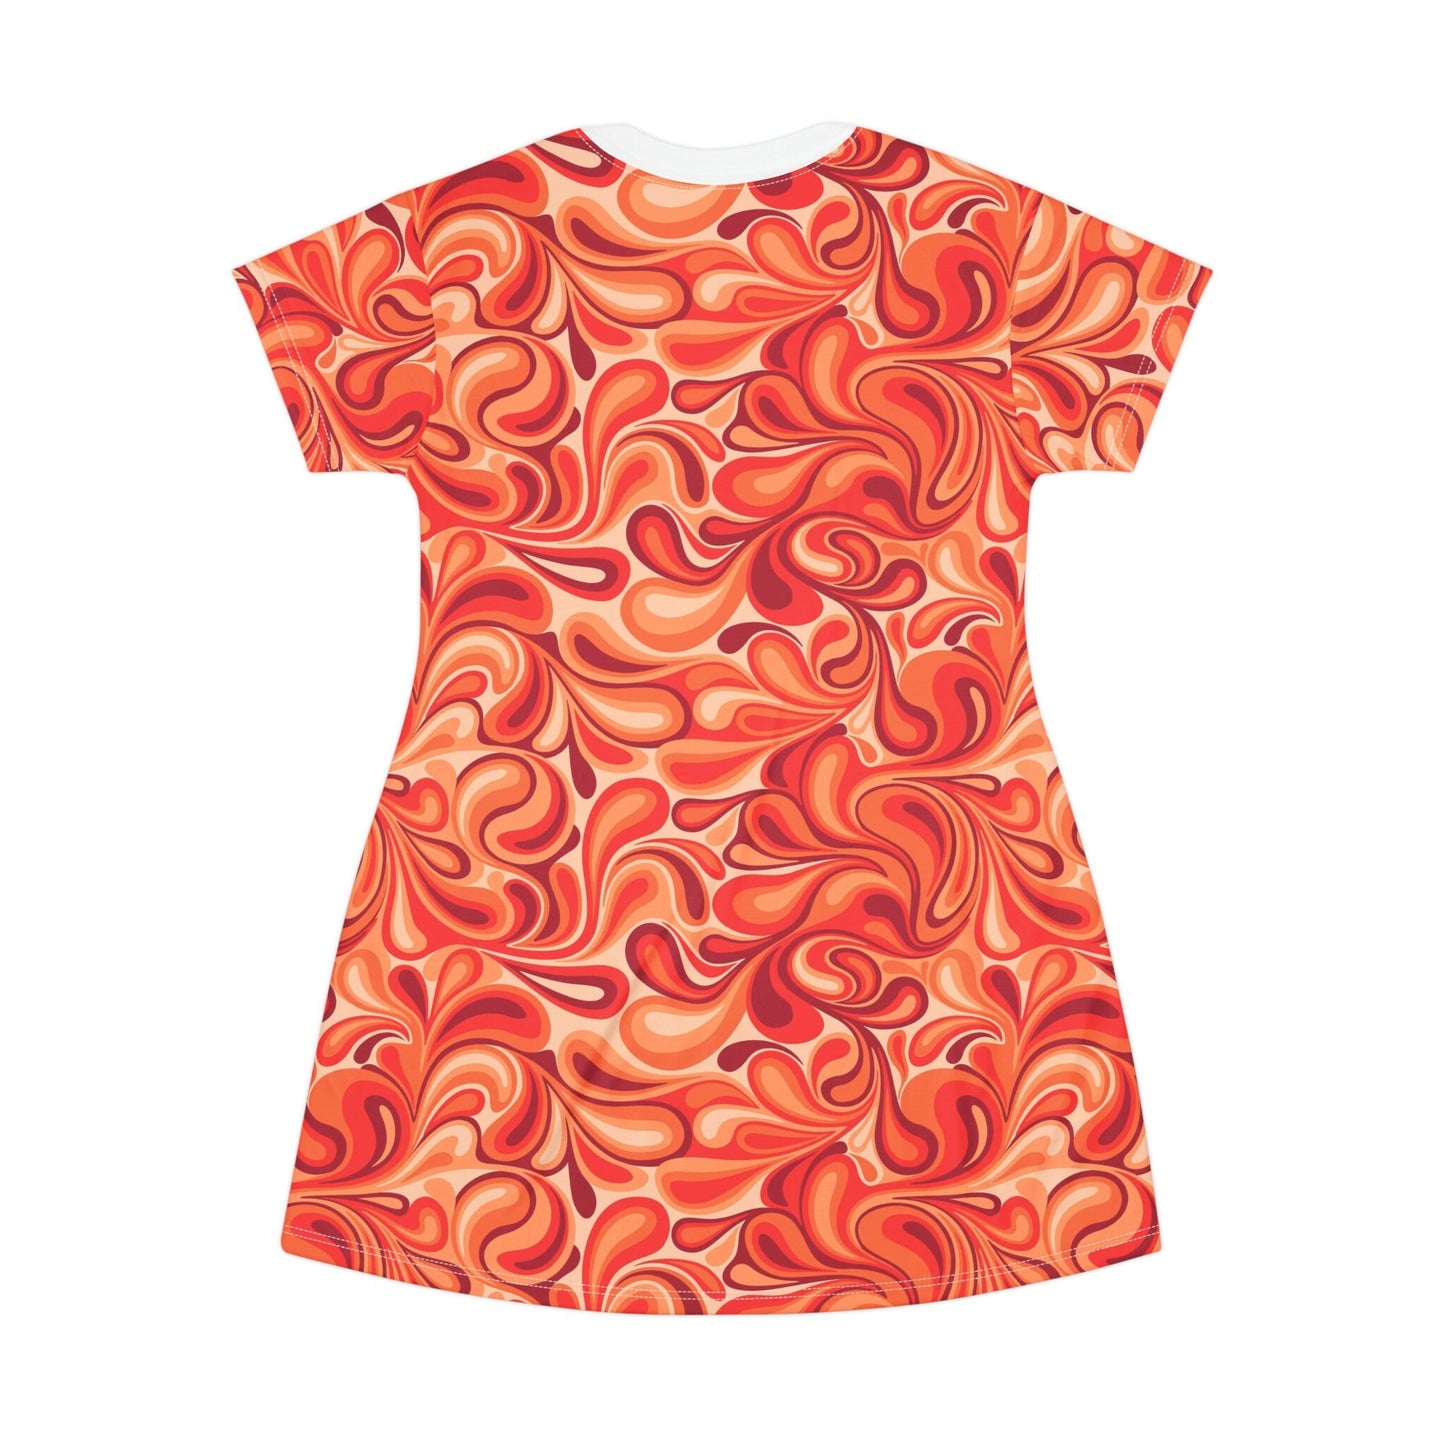 T-Shirt Dress - Red Abstract